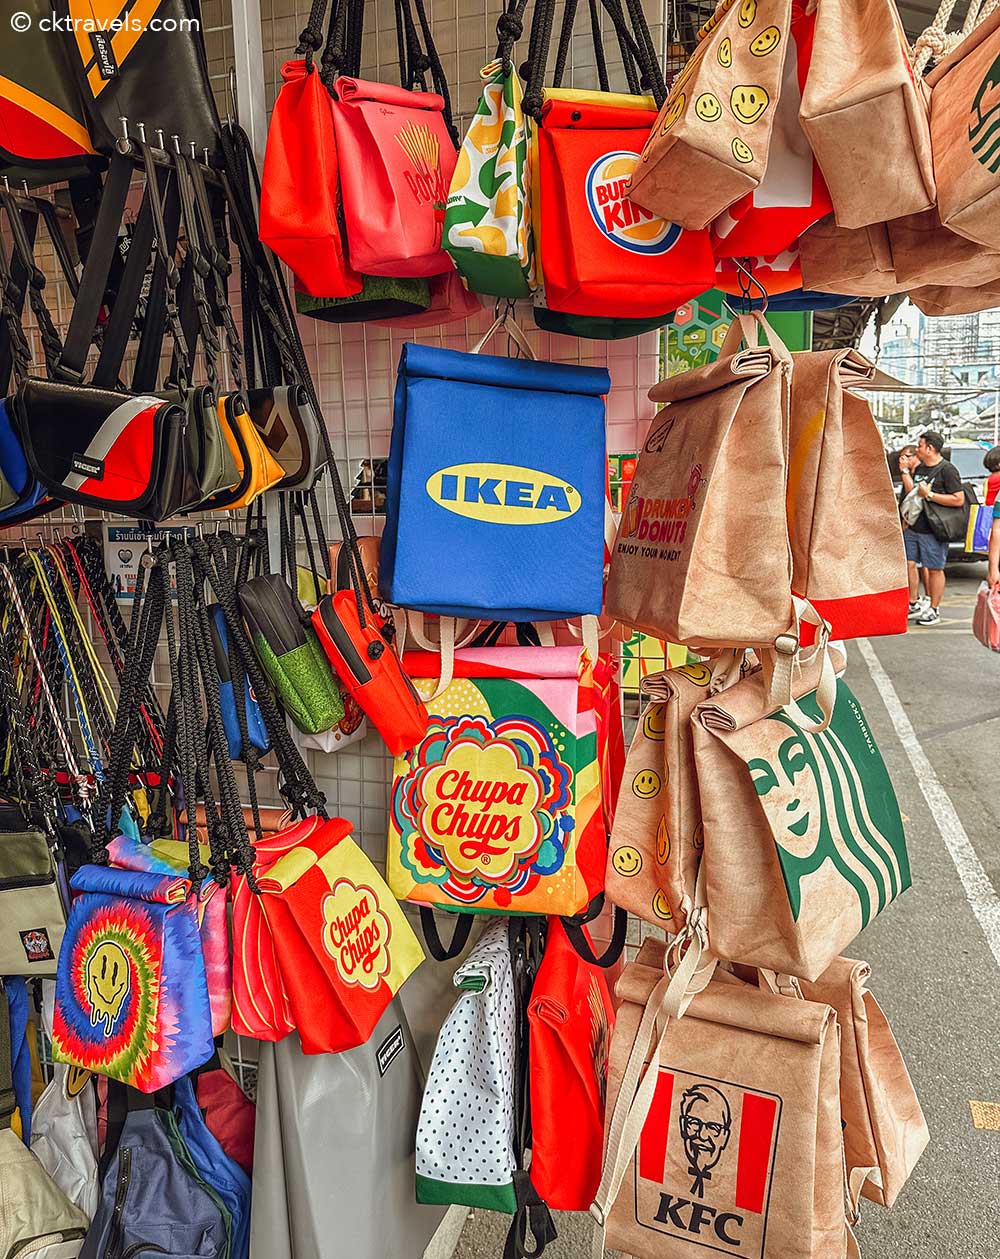 6 Thai tote bag brands to carry grocery shopping | Lifestyle Asia Bangkok